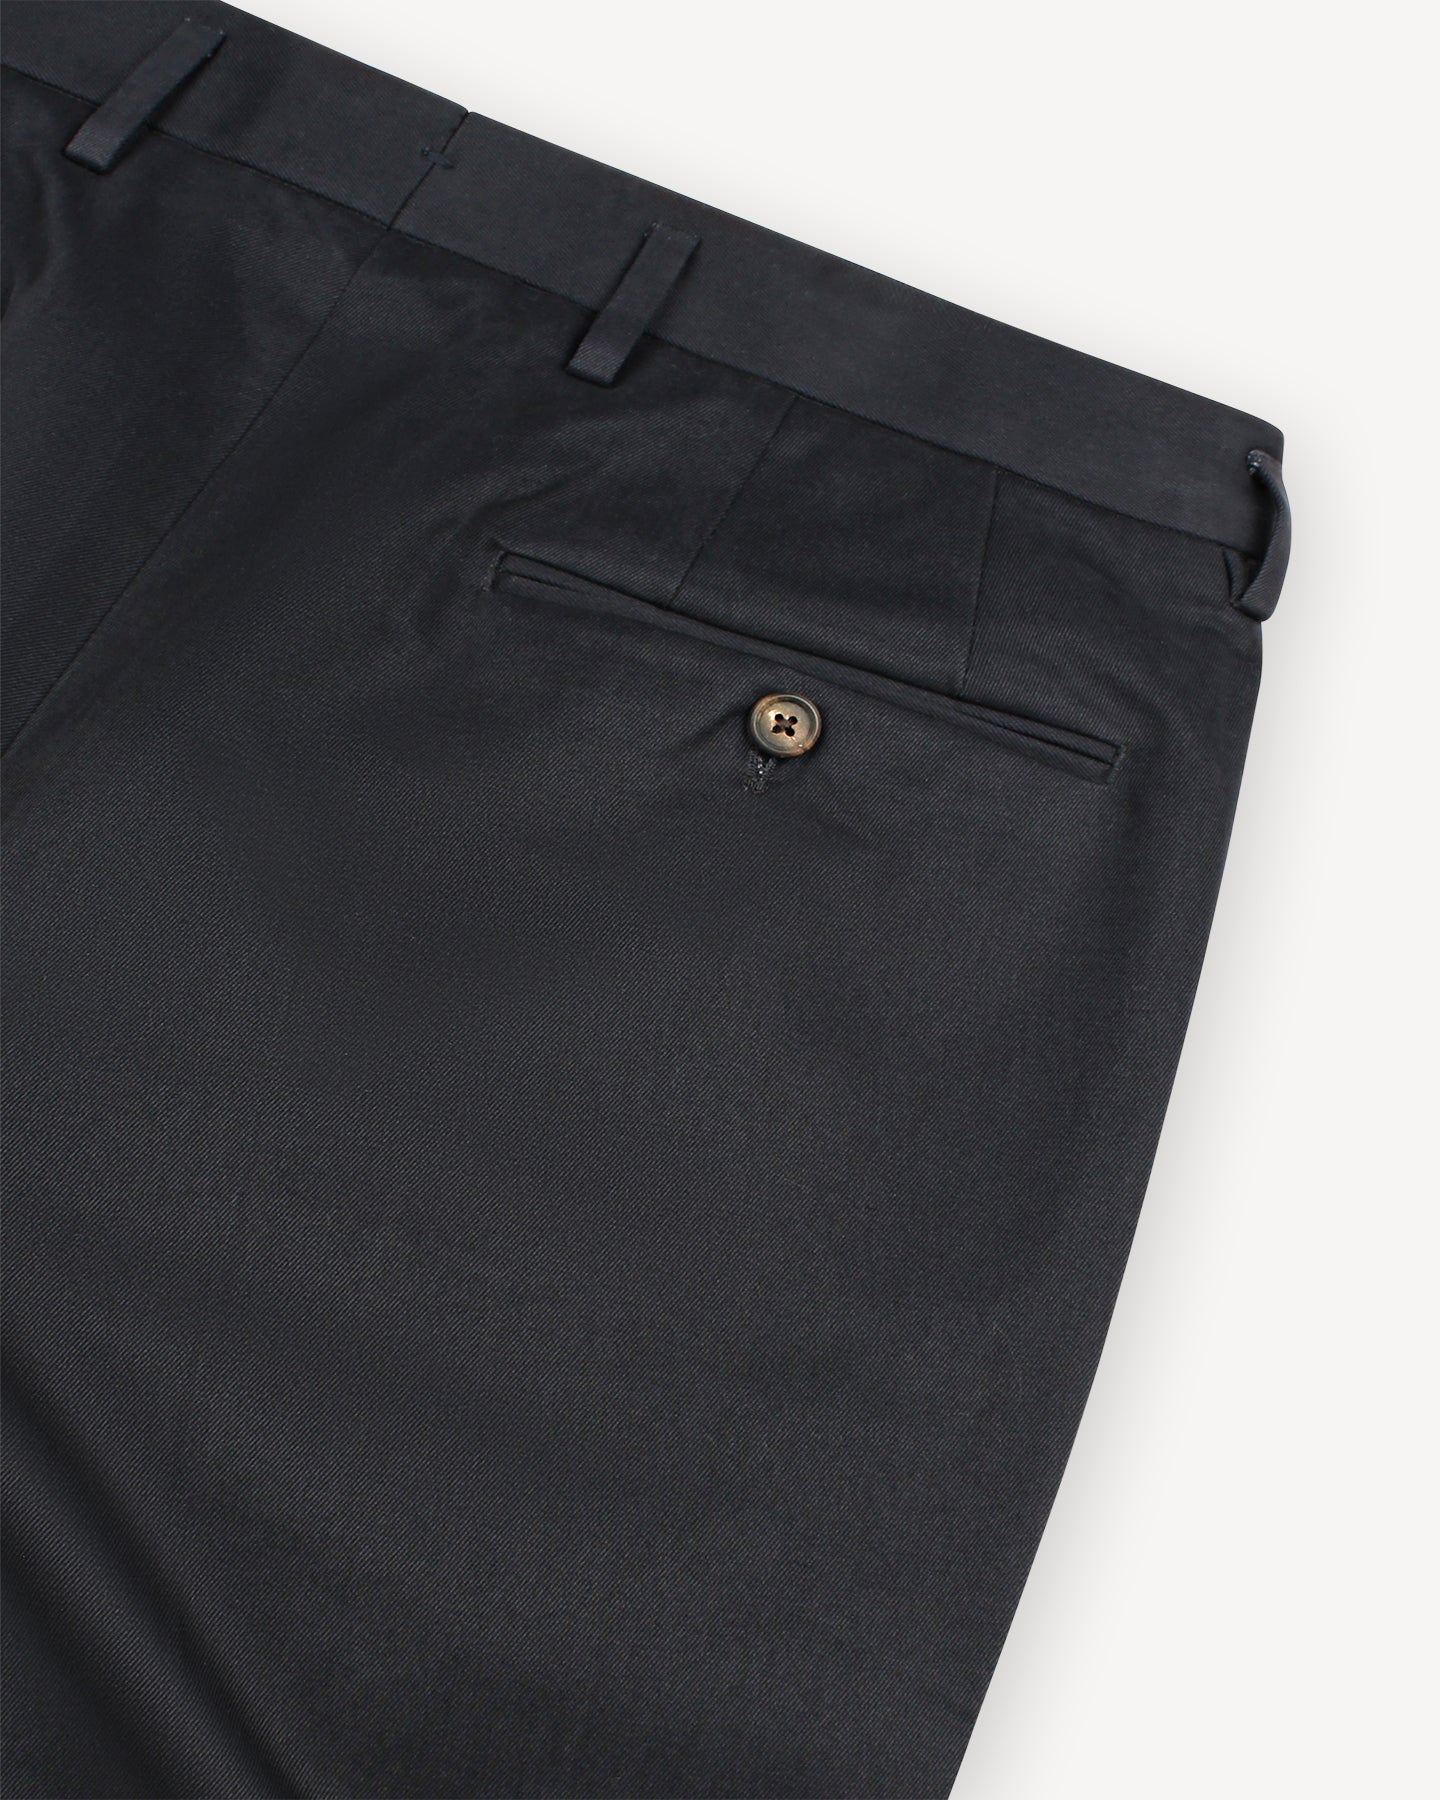 Navy Double Pleat Cotton Drill Trousers with horn buttons